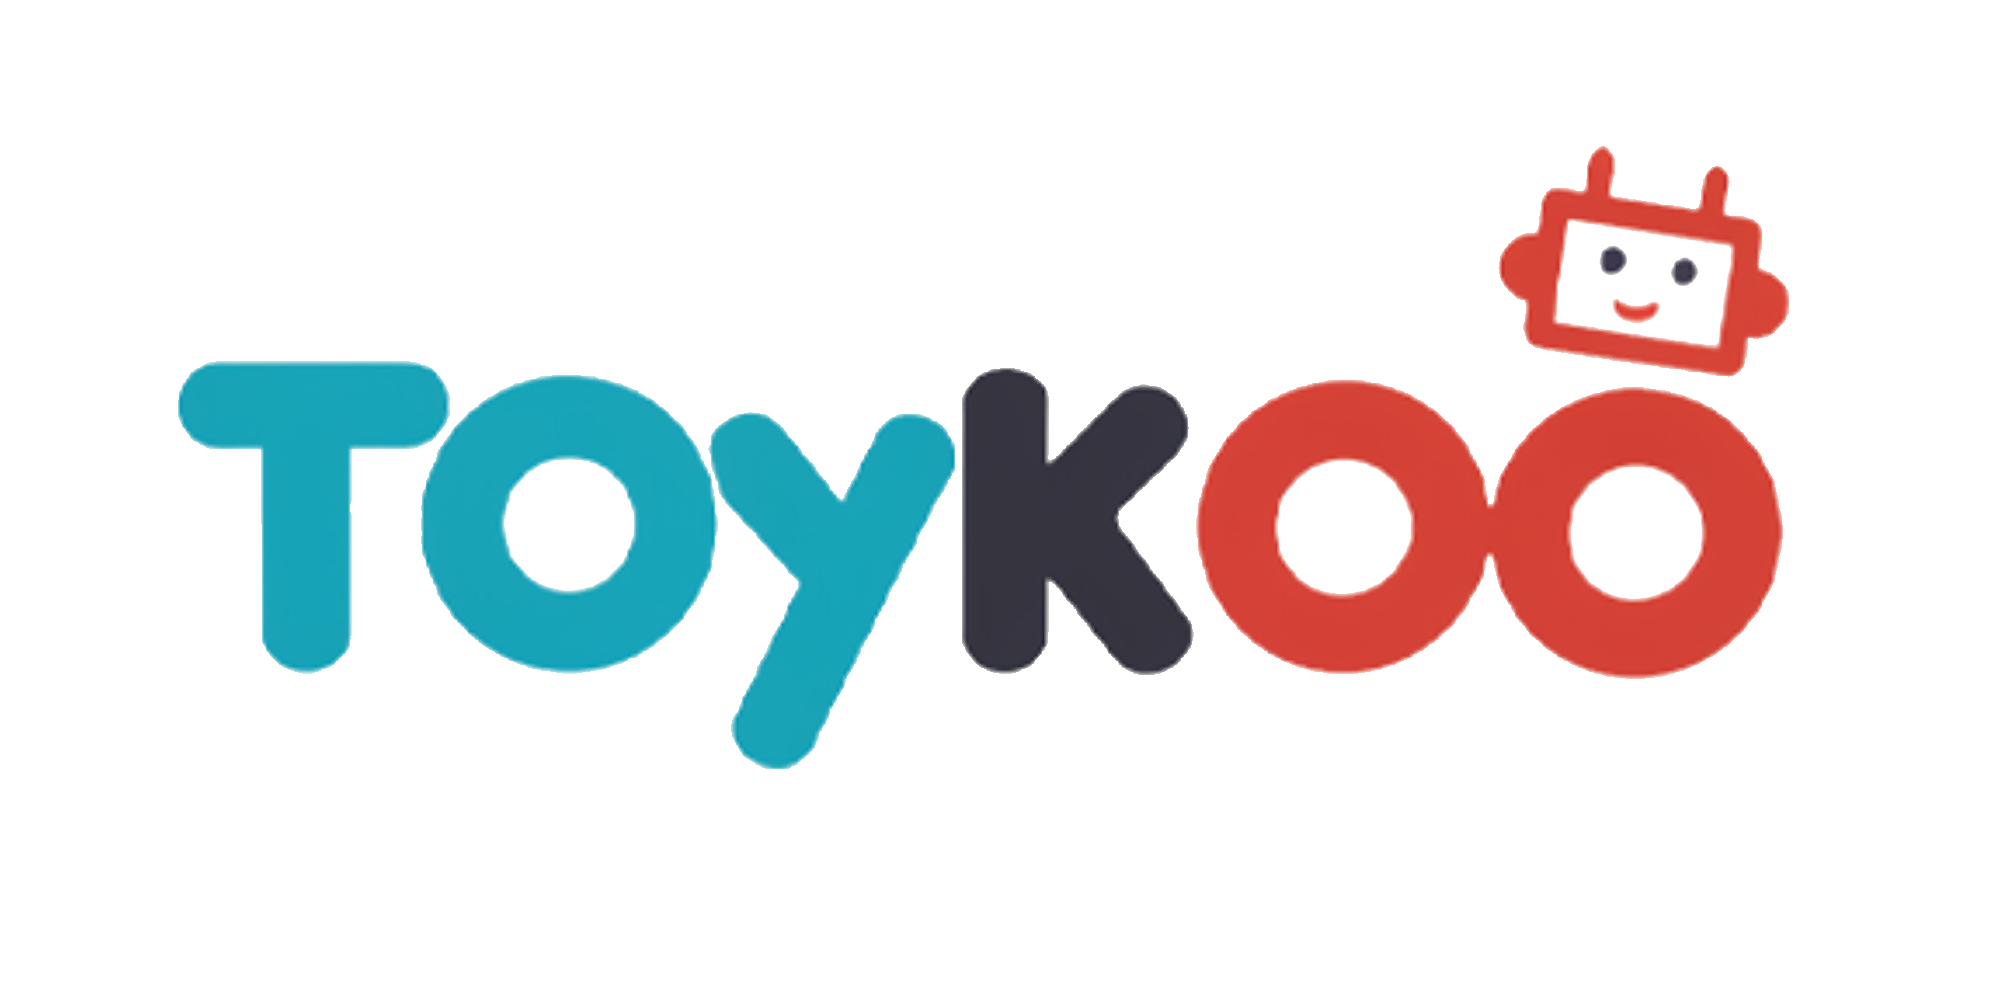 Toykoo